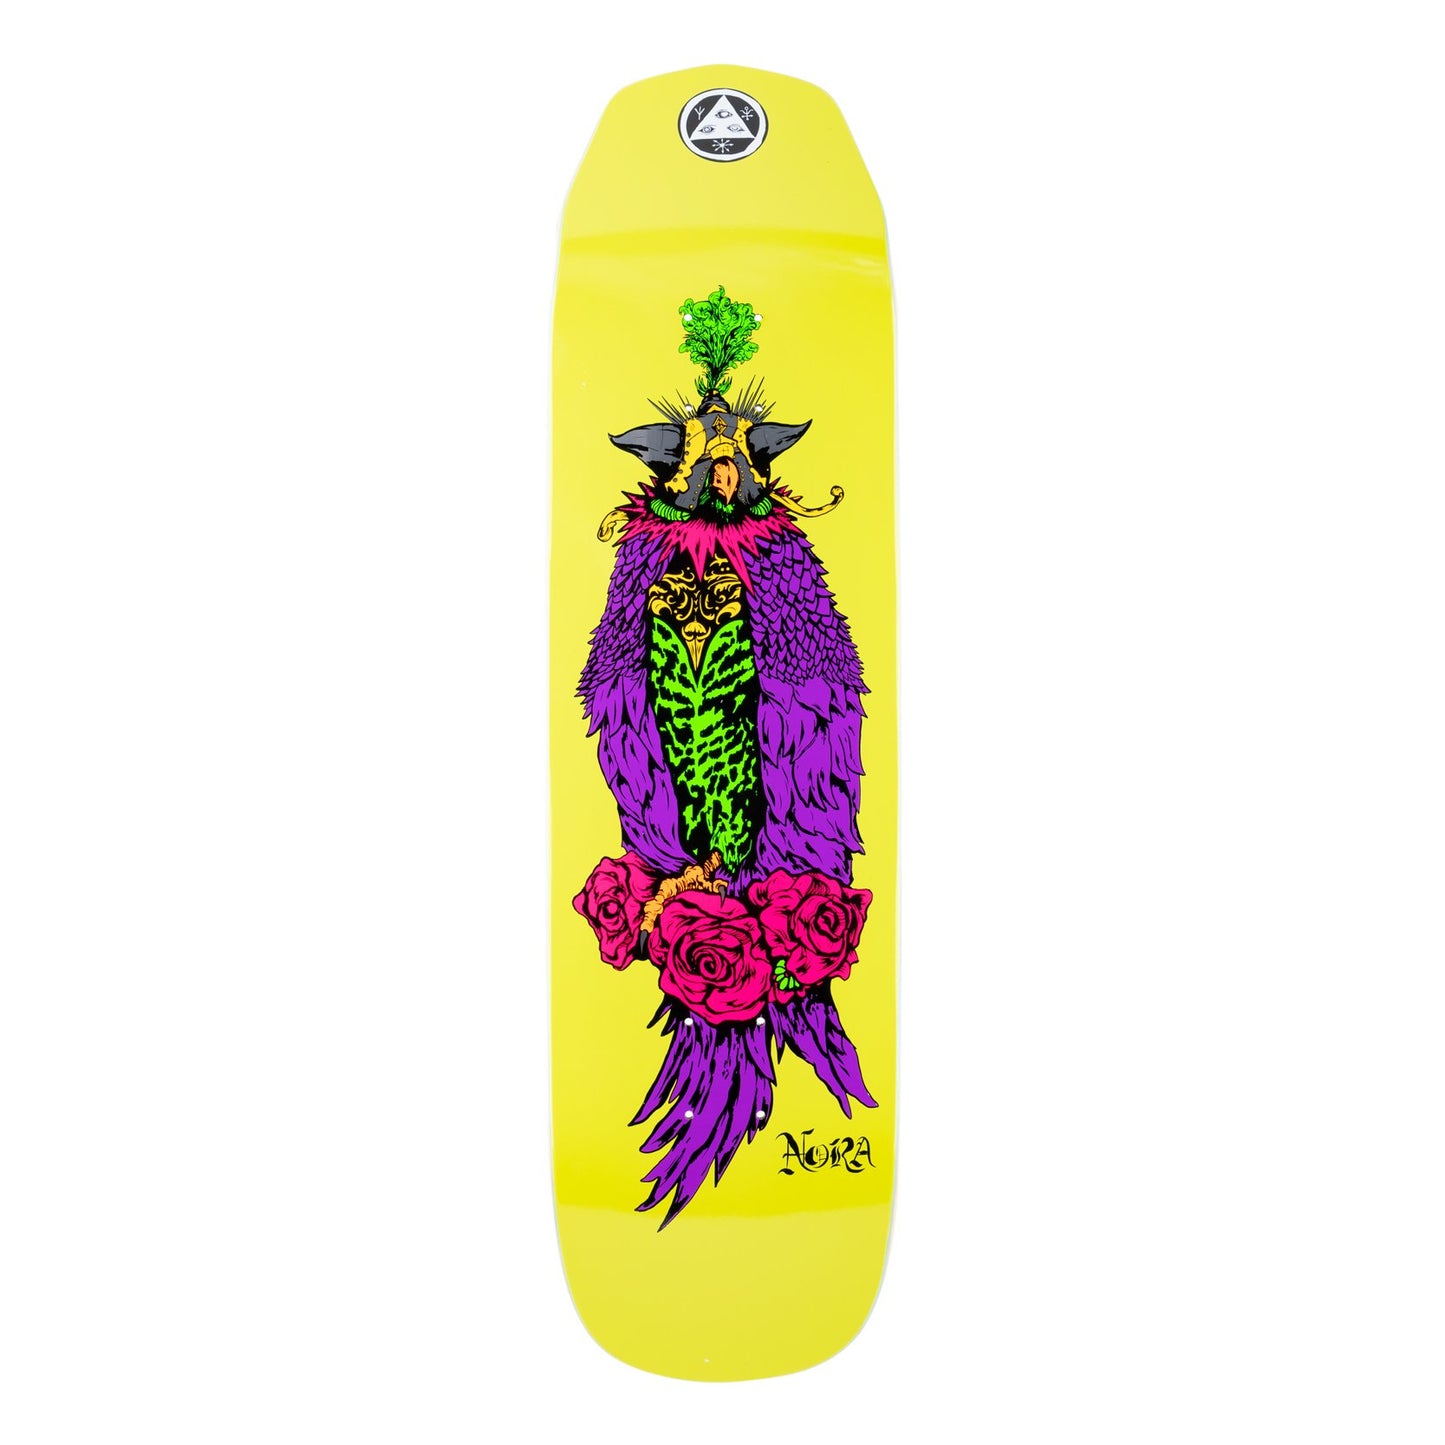 Welcome Deck - Nora Vasconcellos "Peregrine on Wicked Princess"